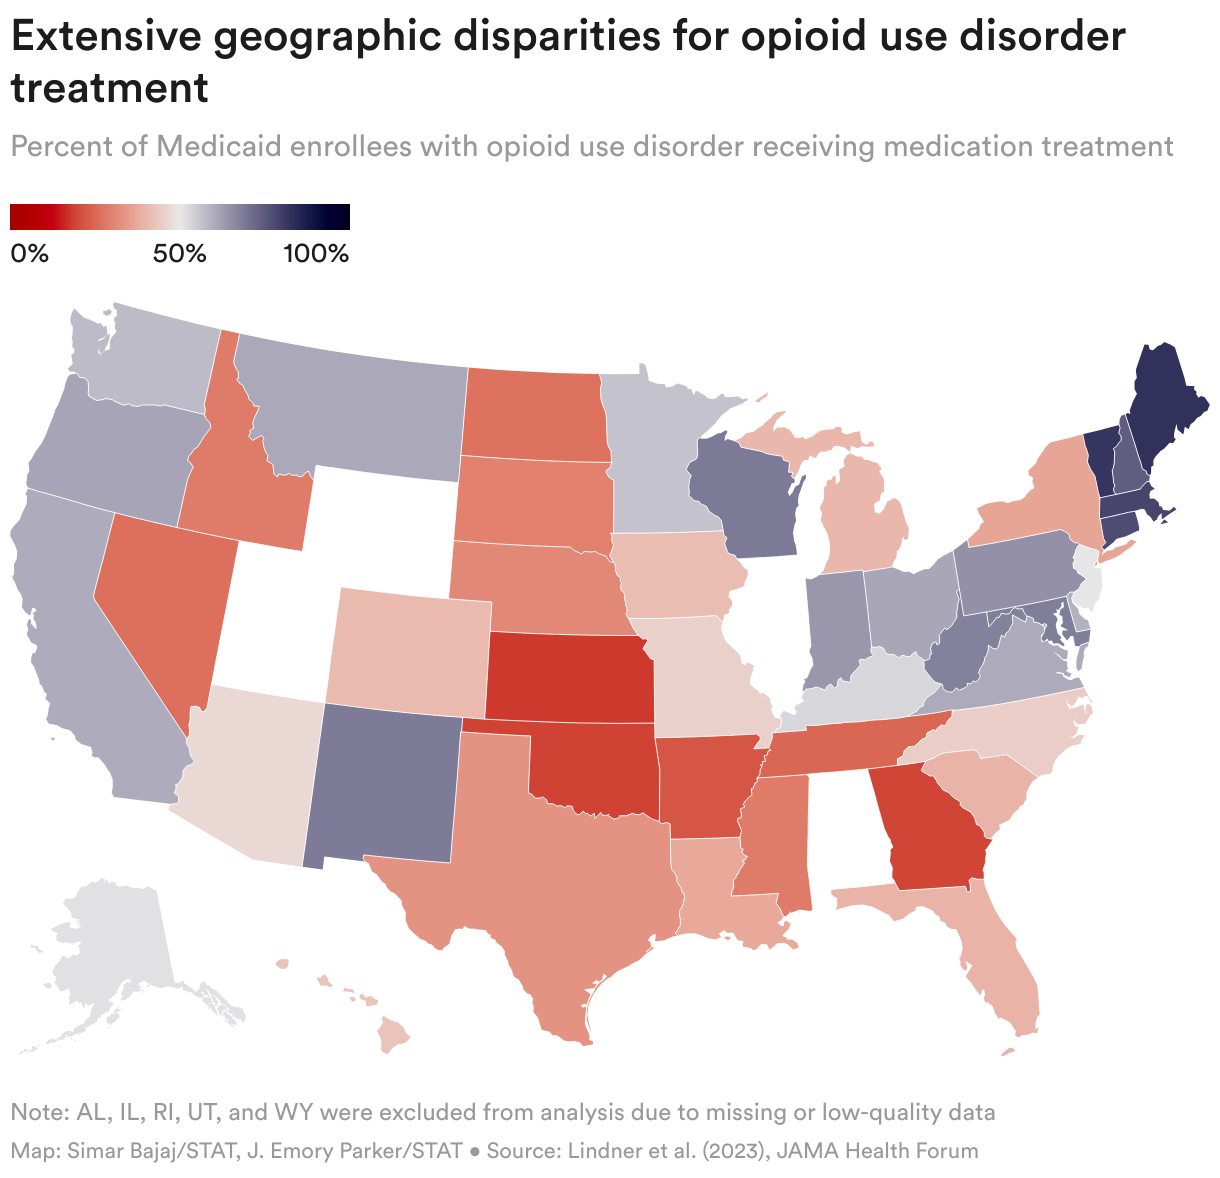 Map of the United States showing what percentage of people with opioid use disorder receive medication treatment. There are wide disparities across the nation. New England and the Upper Midwest have the highest percentage. The Plains and the south have the lowest percentage. Alabama, Illinois, Rhode Island, Utah, and Wyoming are not shaded due to missing data.